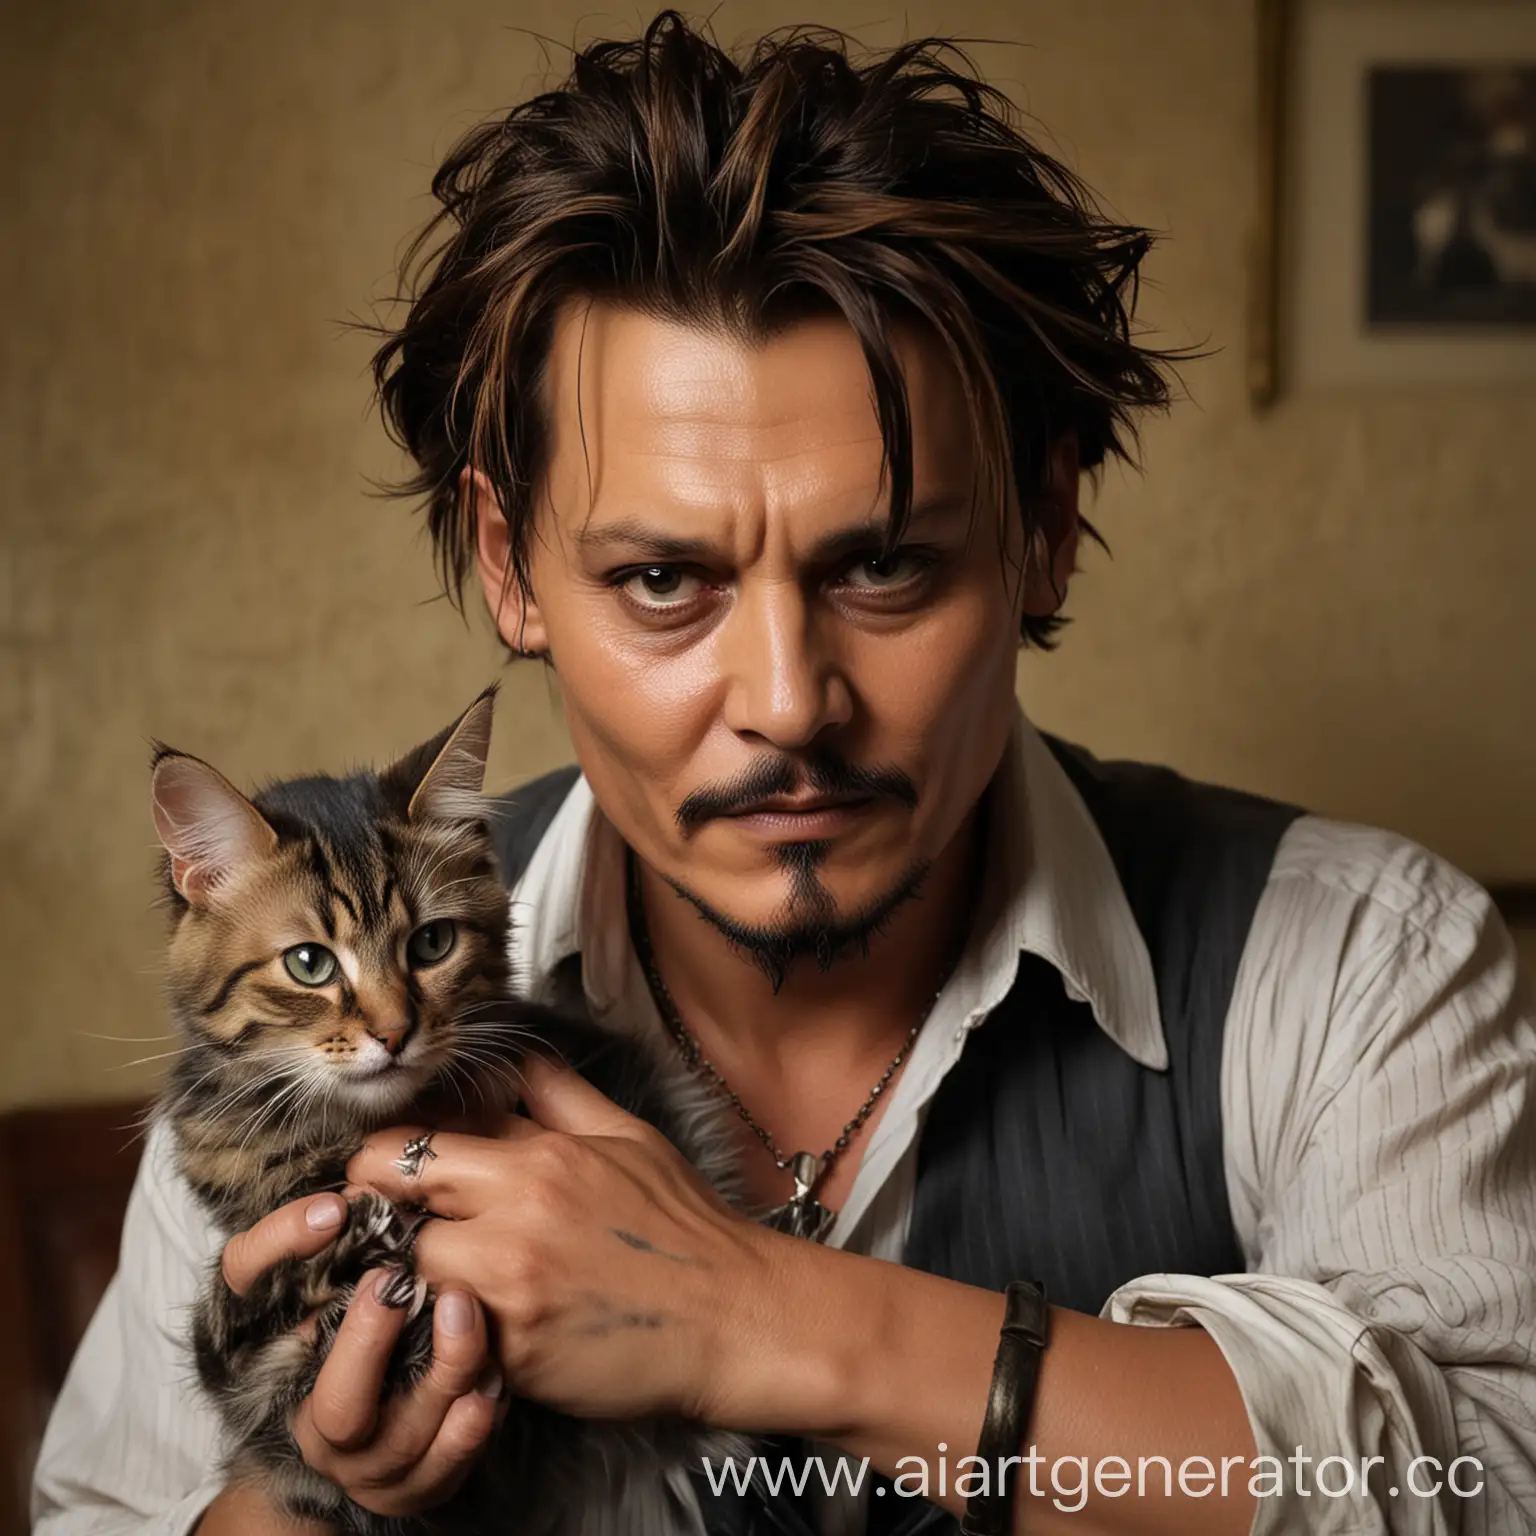 Johnny-Depp-with-a-Mysterious-Cat